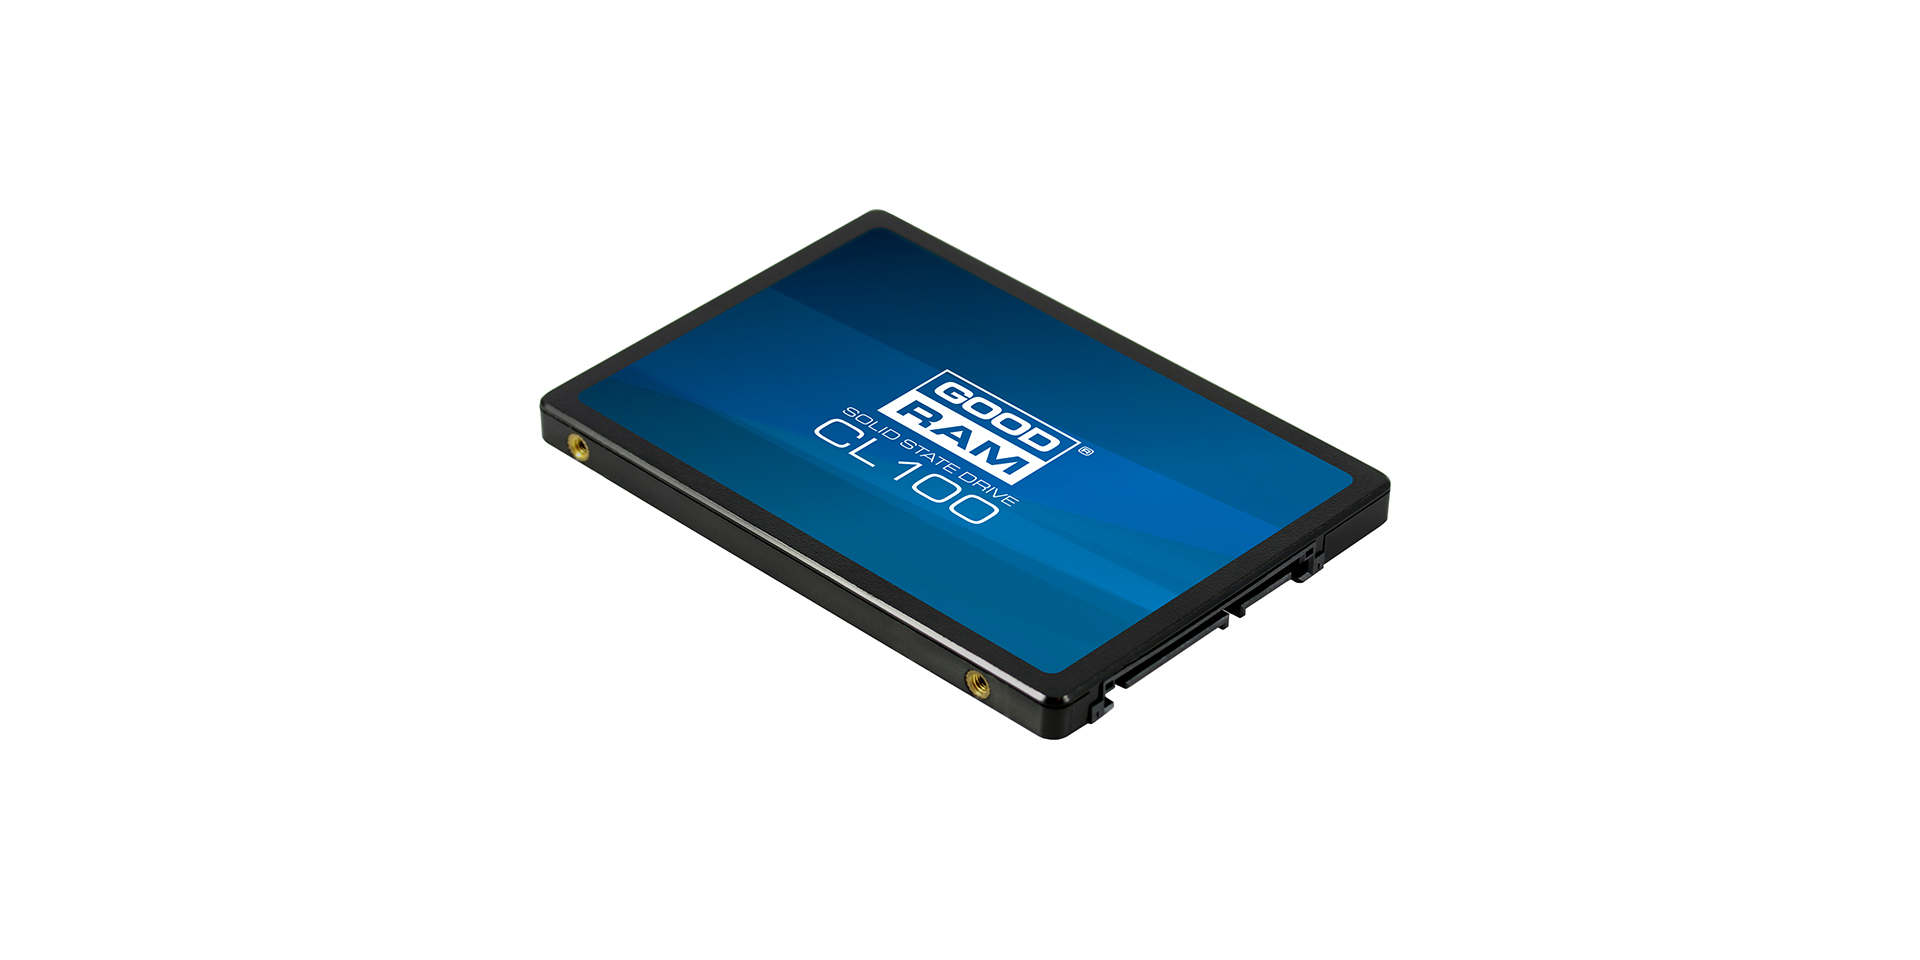 CL100 solid state drive